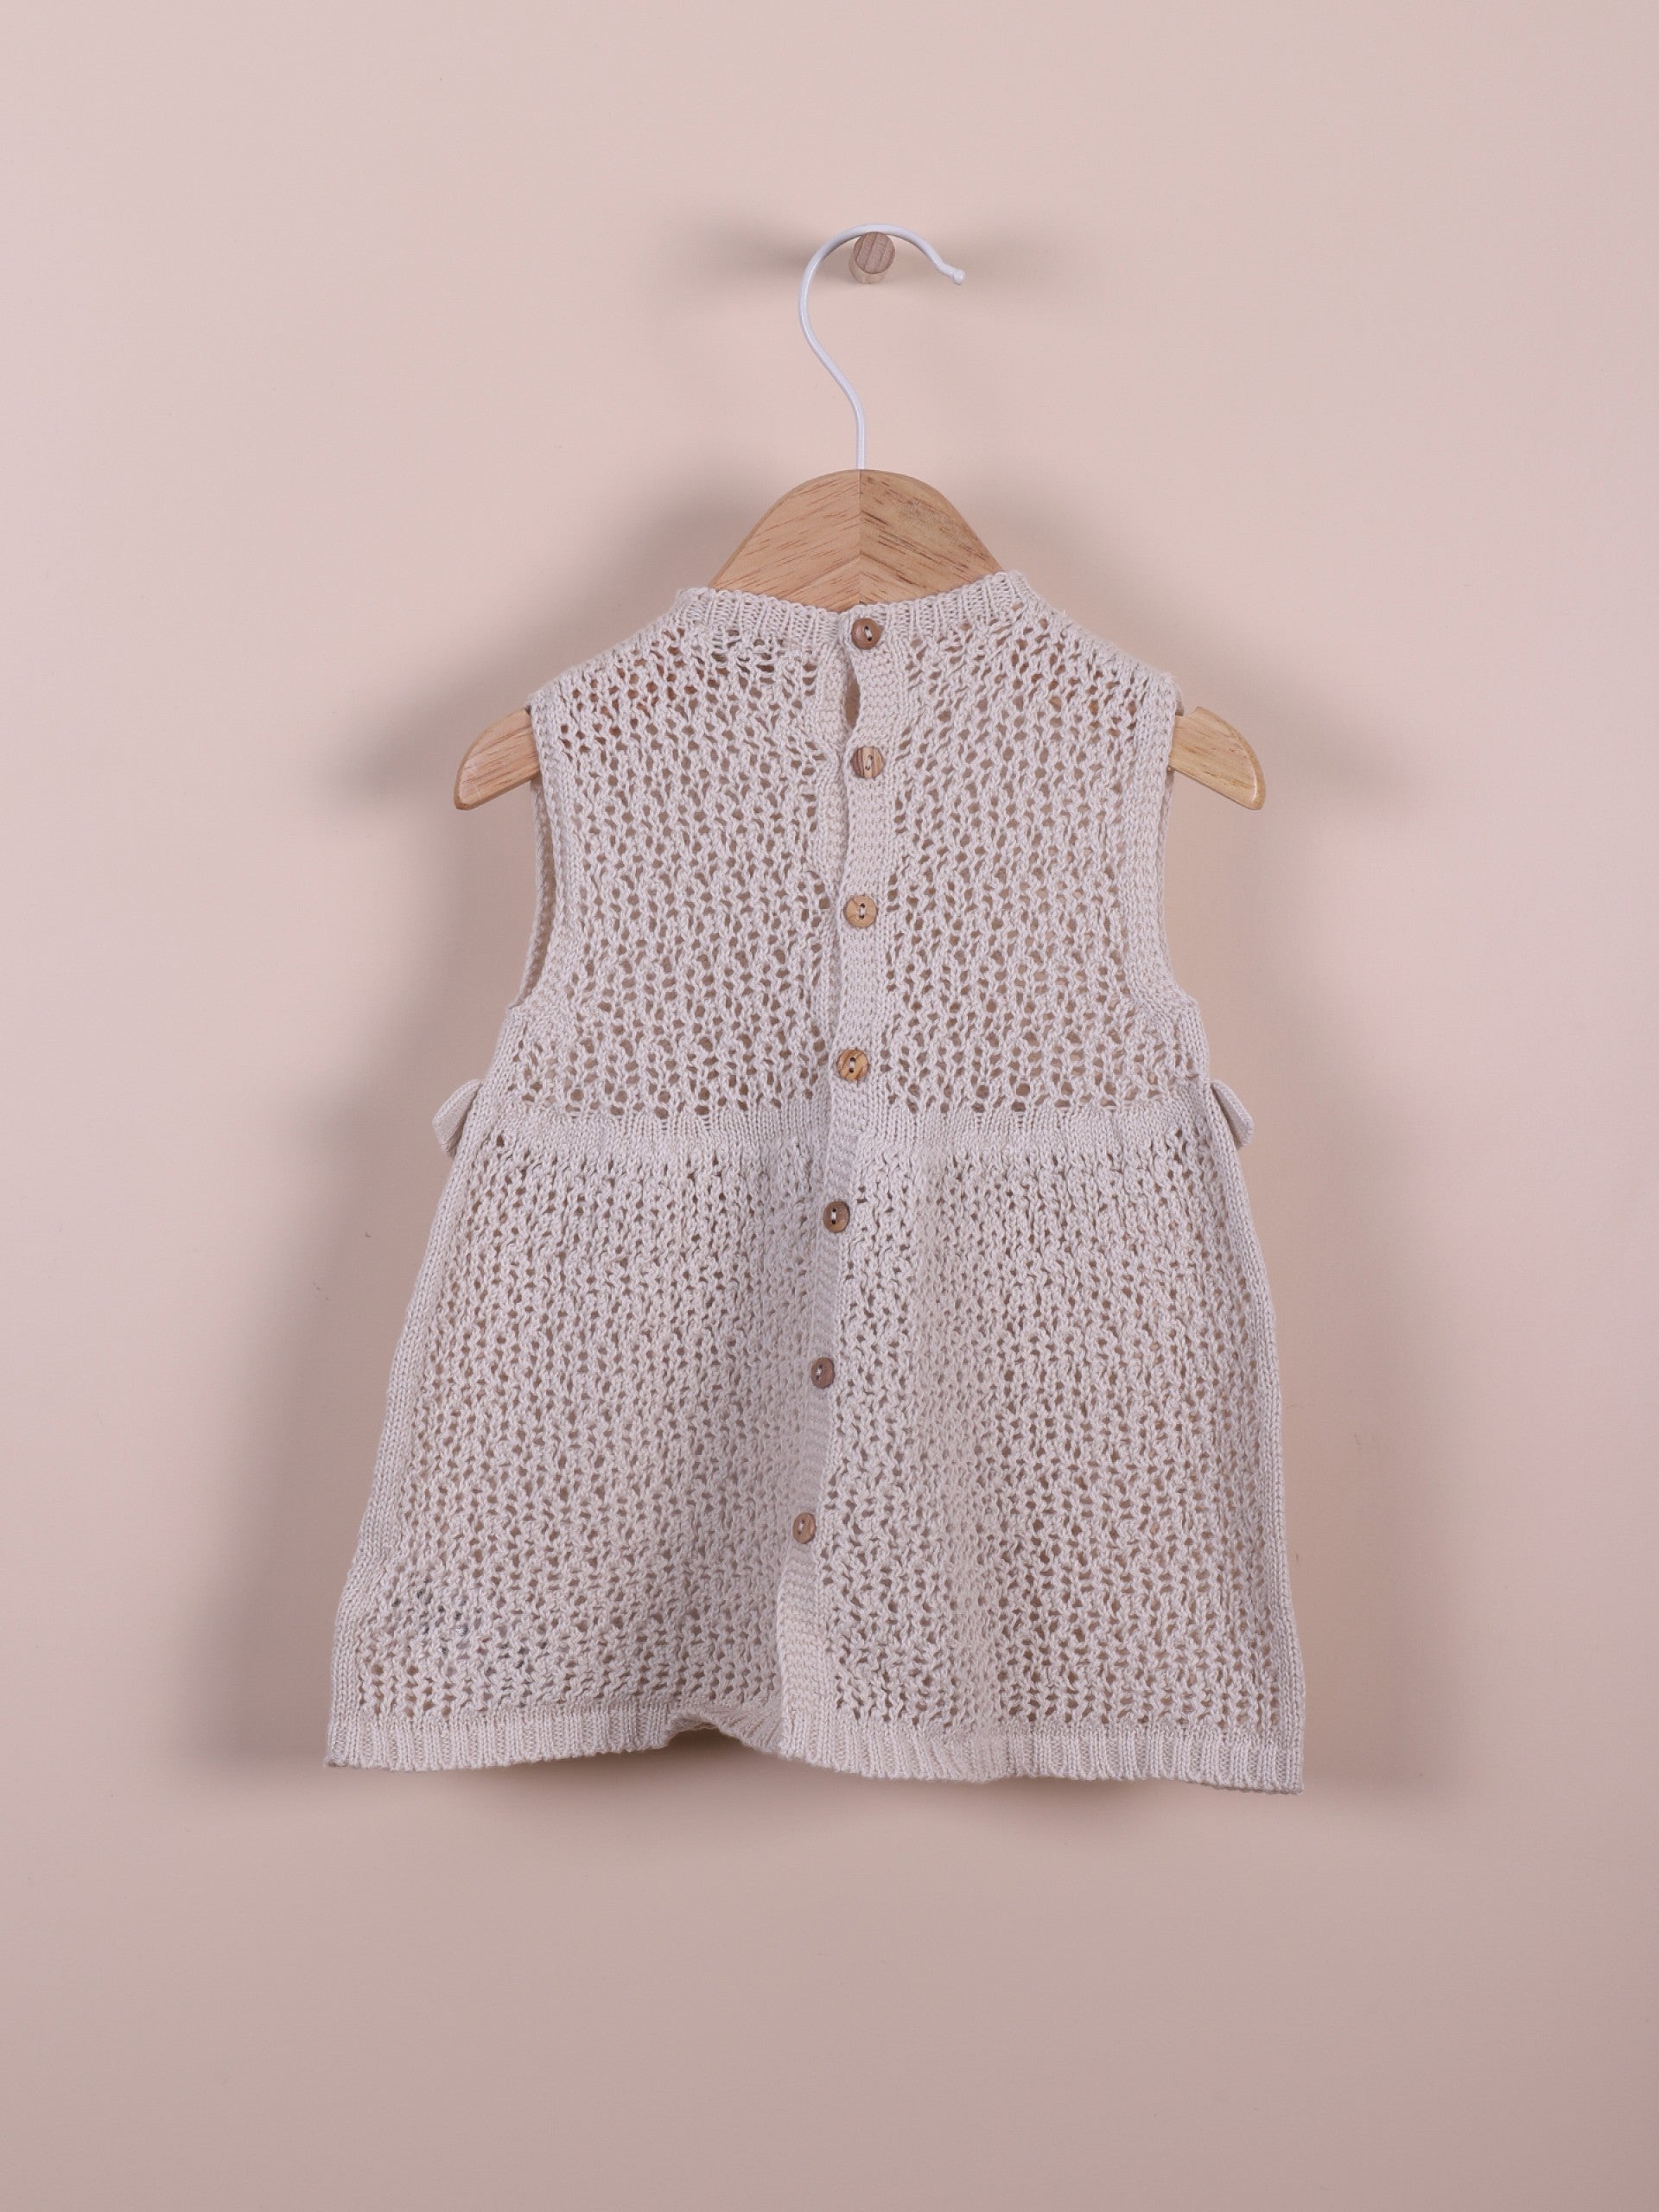 Beige cotton knitted dress - Wedoble